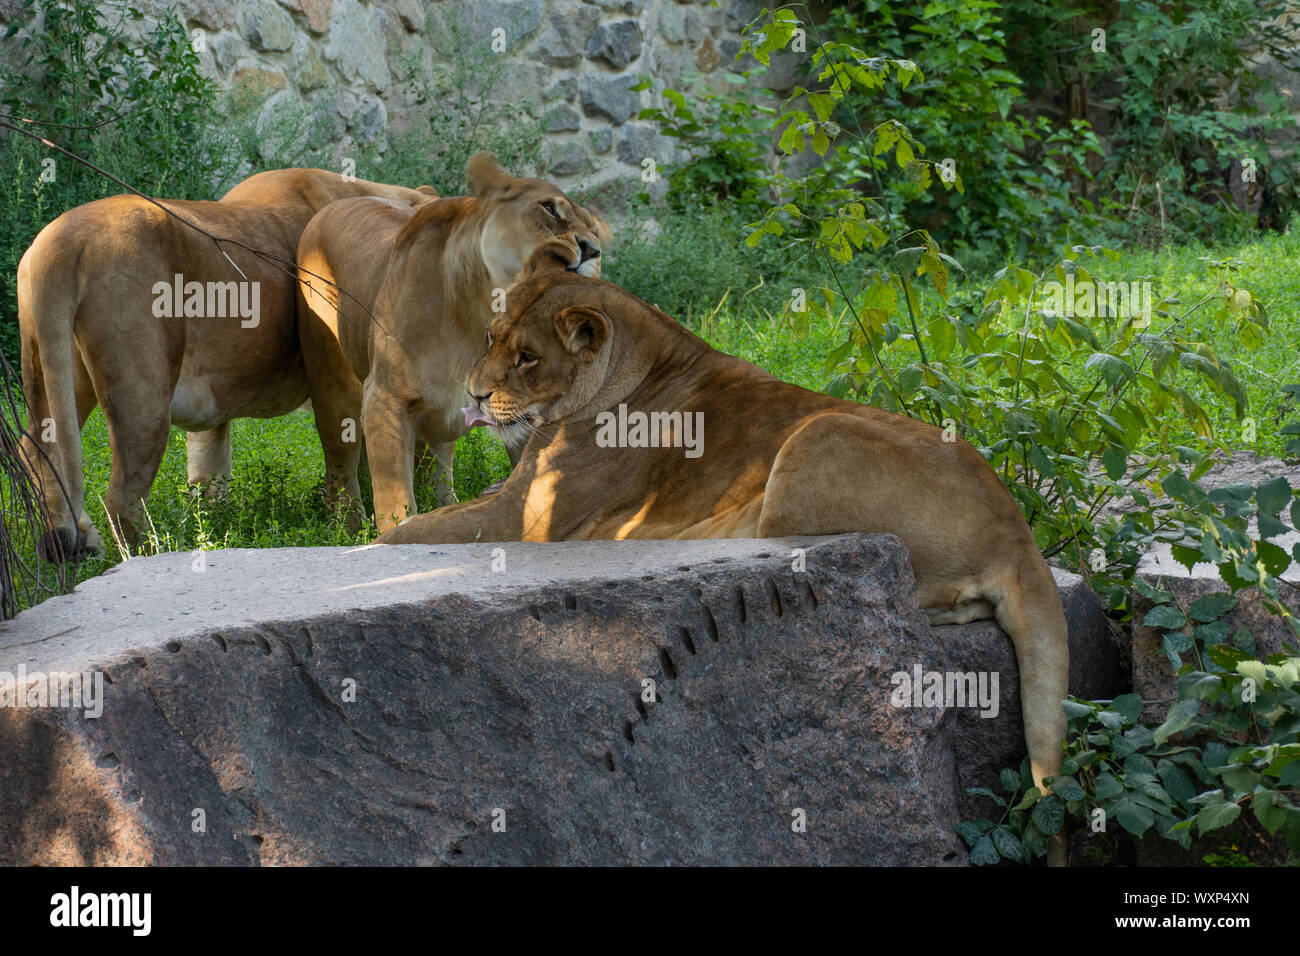 Lions are taking care of each other. Wild nature. Stock Photo